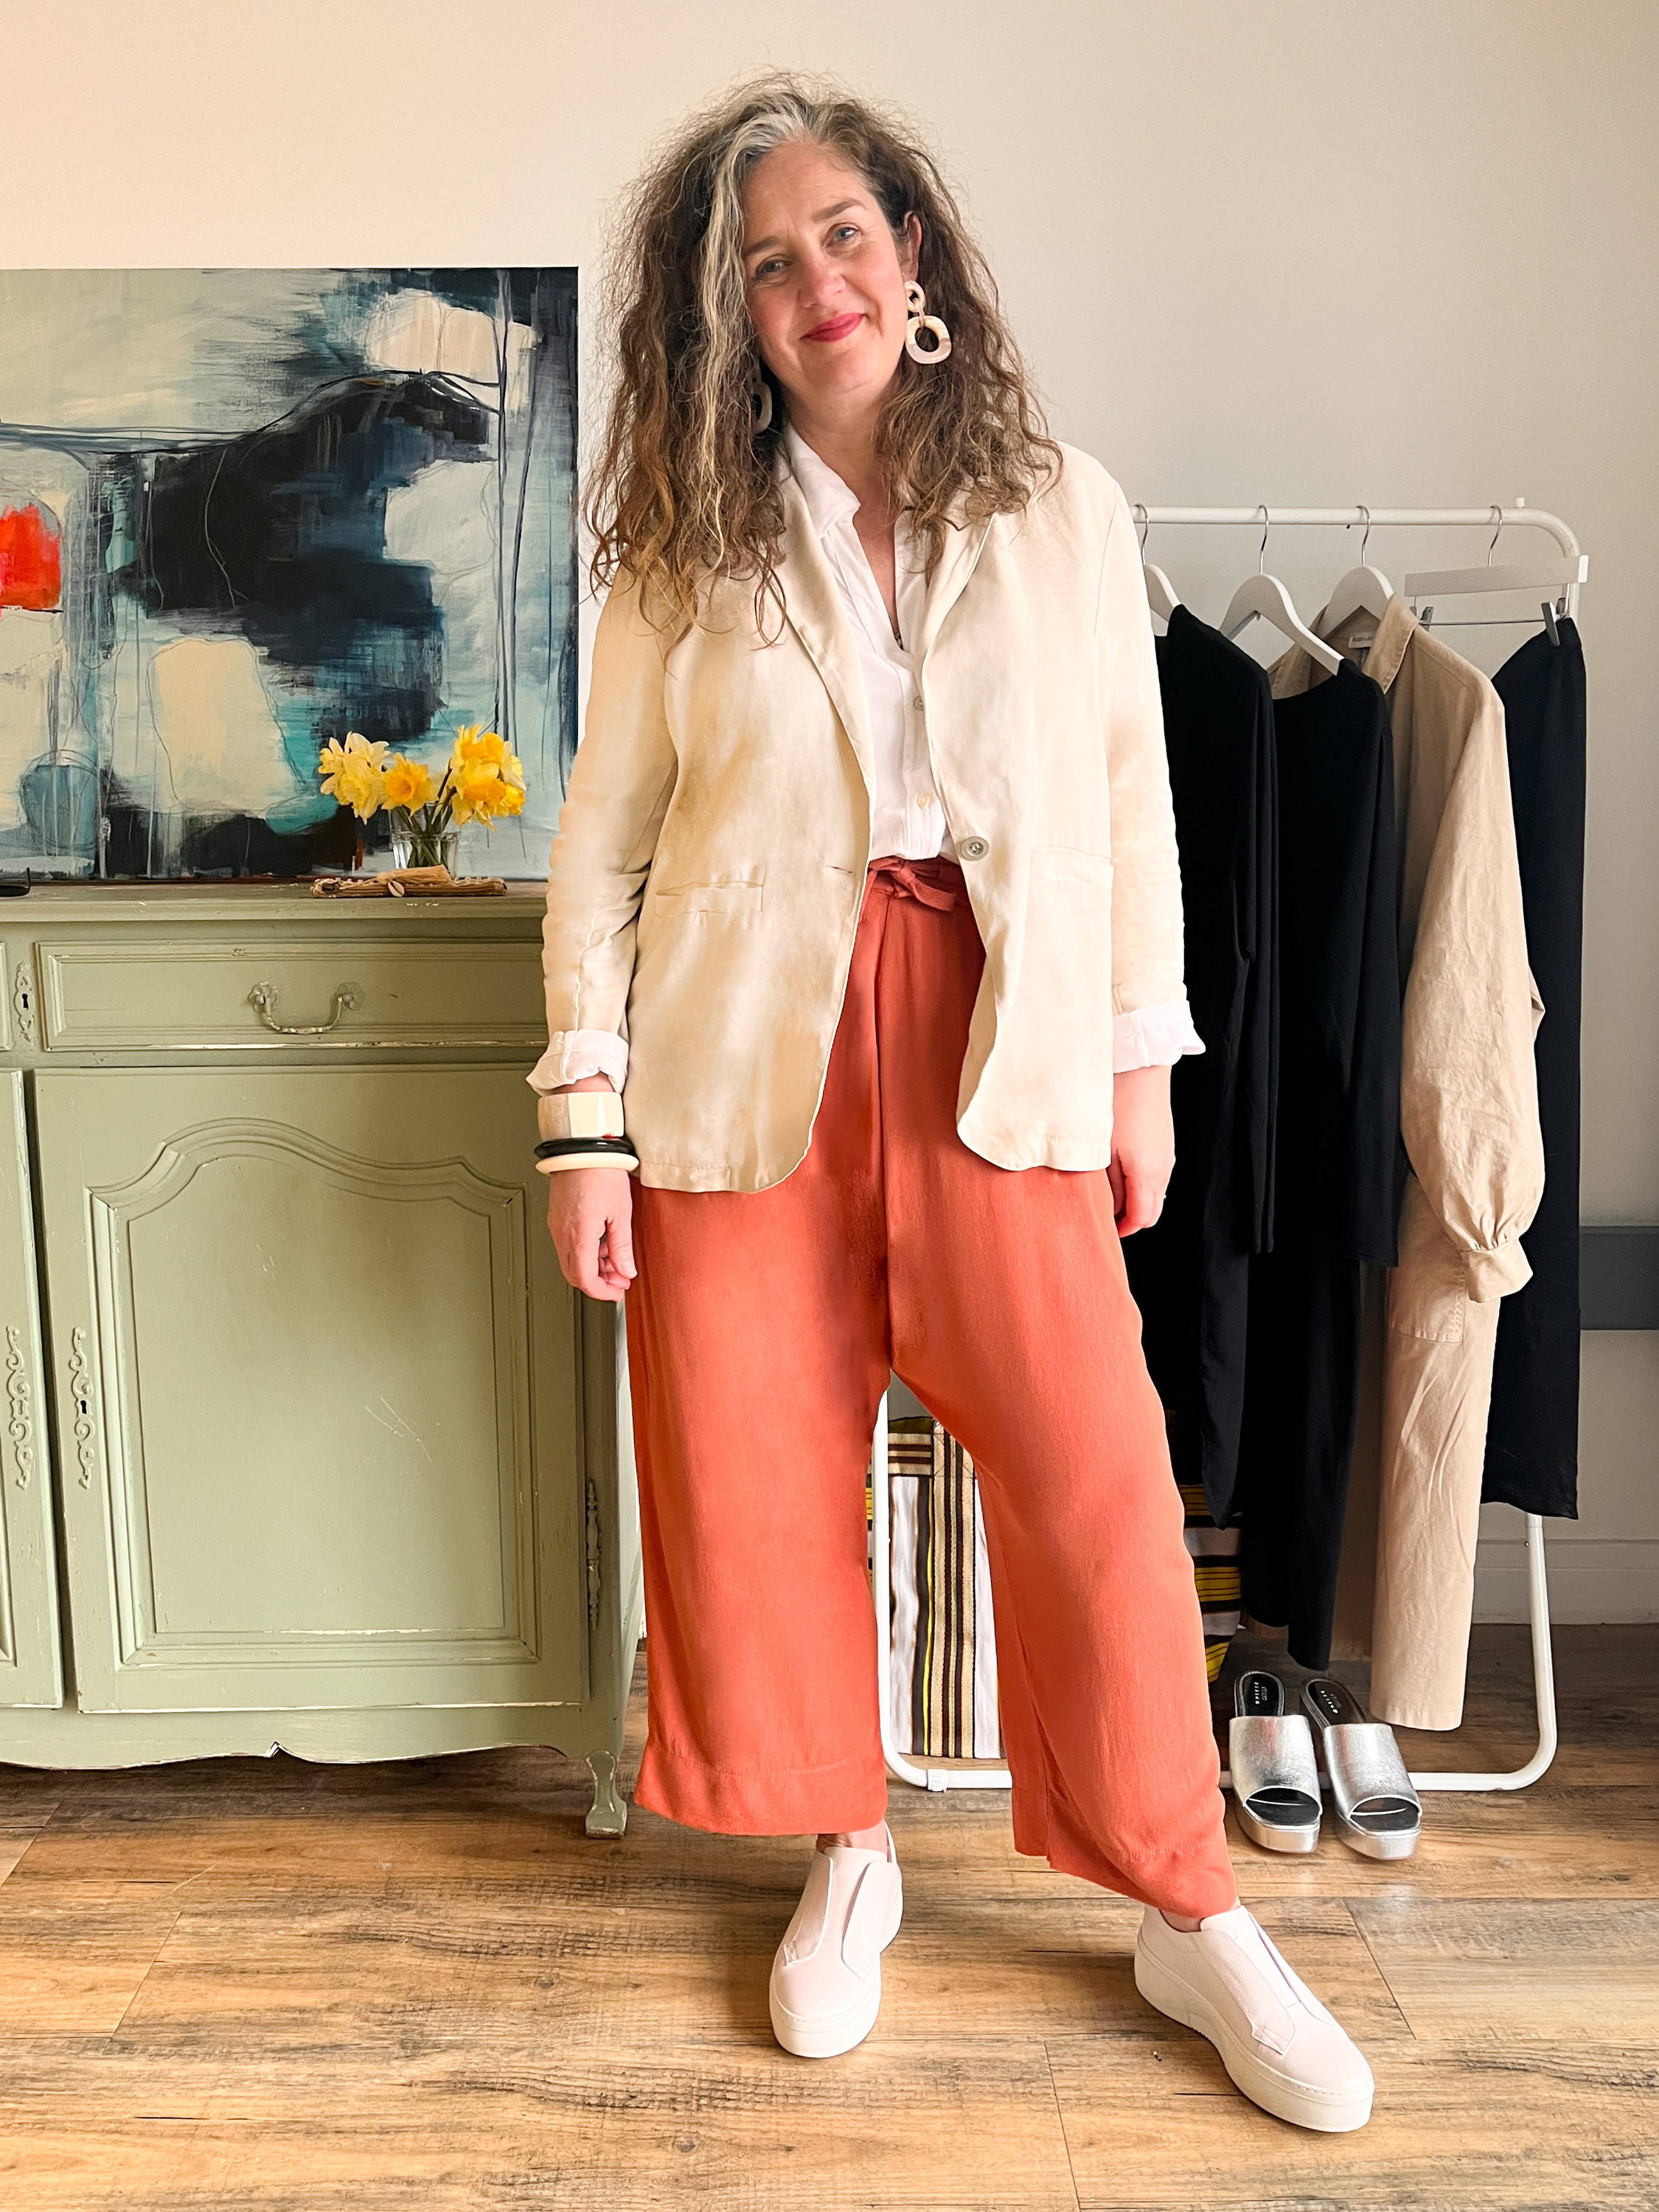 Emma wearing a cream jacket and terracotta trousers